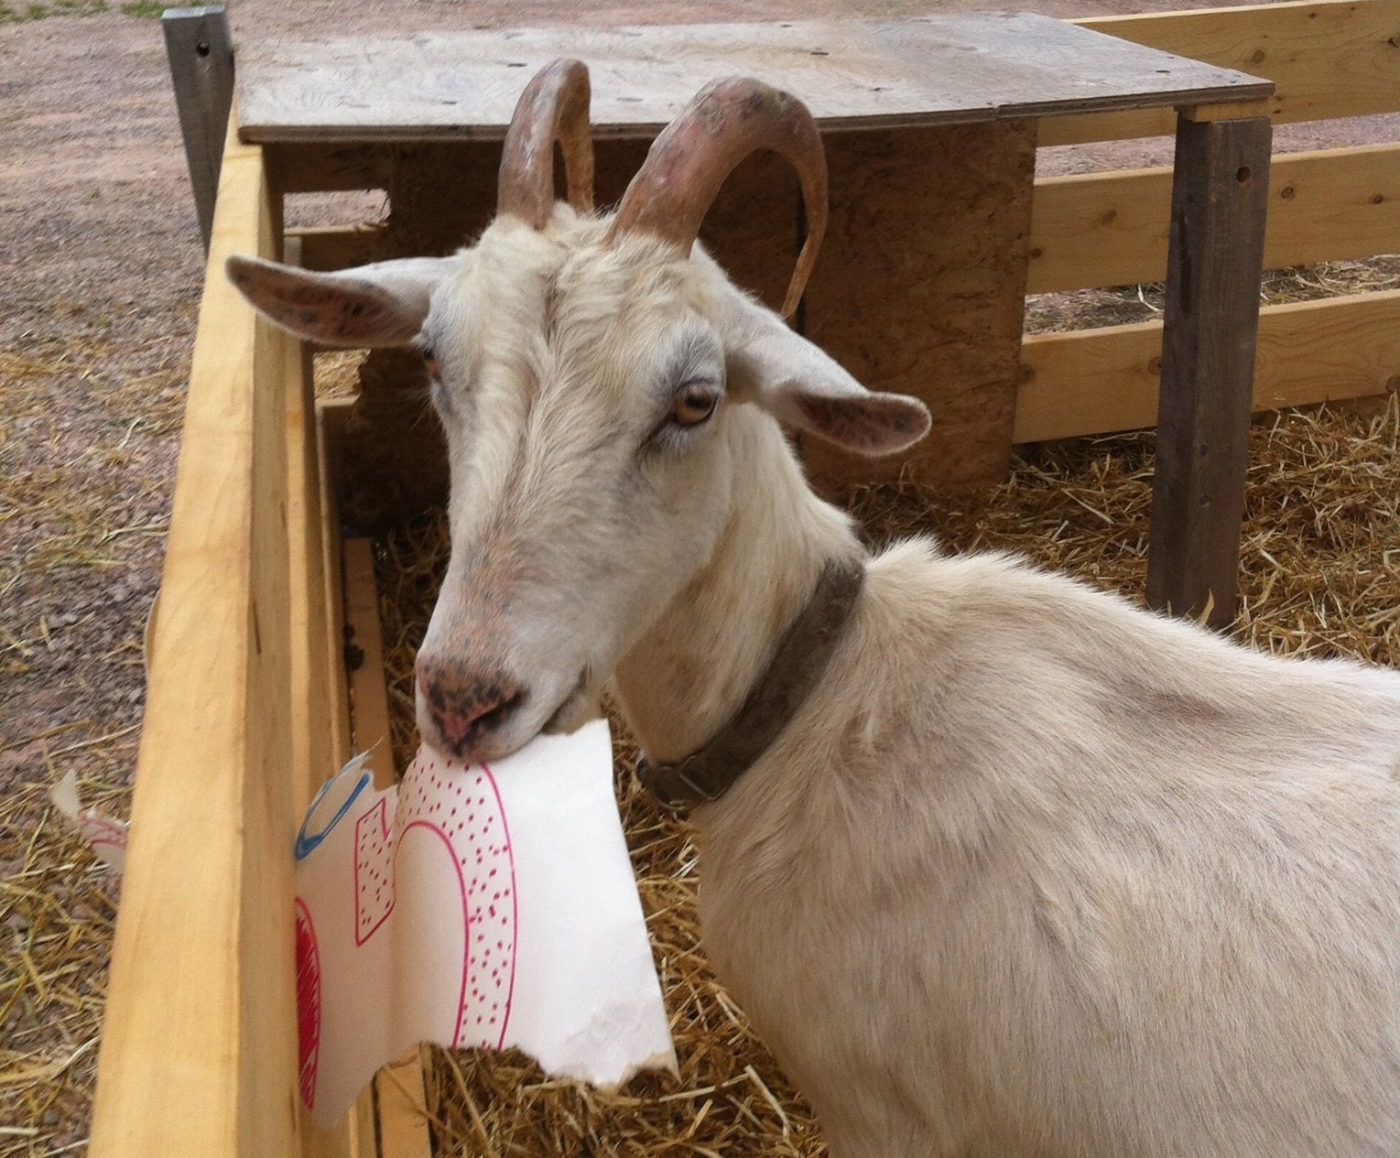 Goat in outdoor paddock at Great Canadian Soap Co